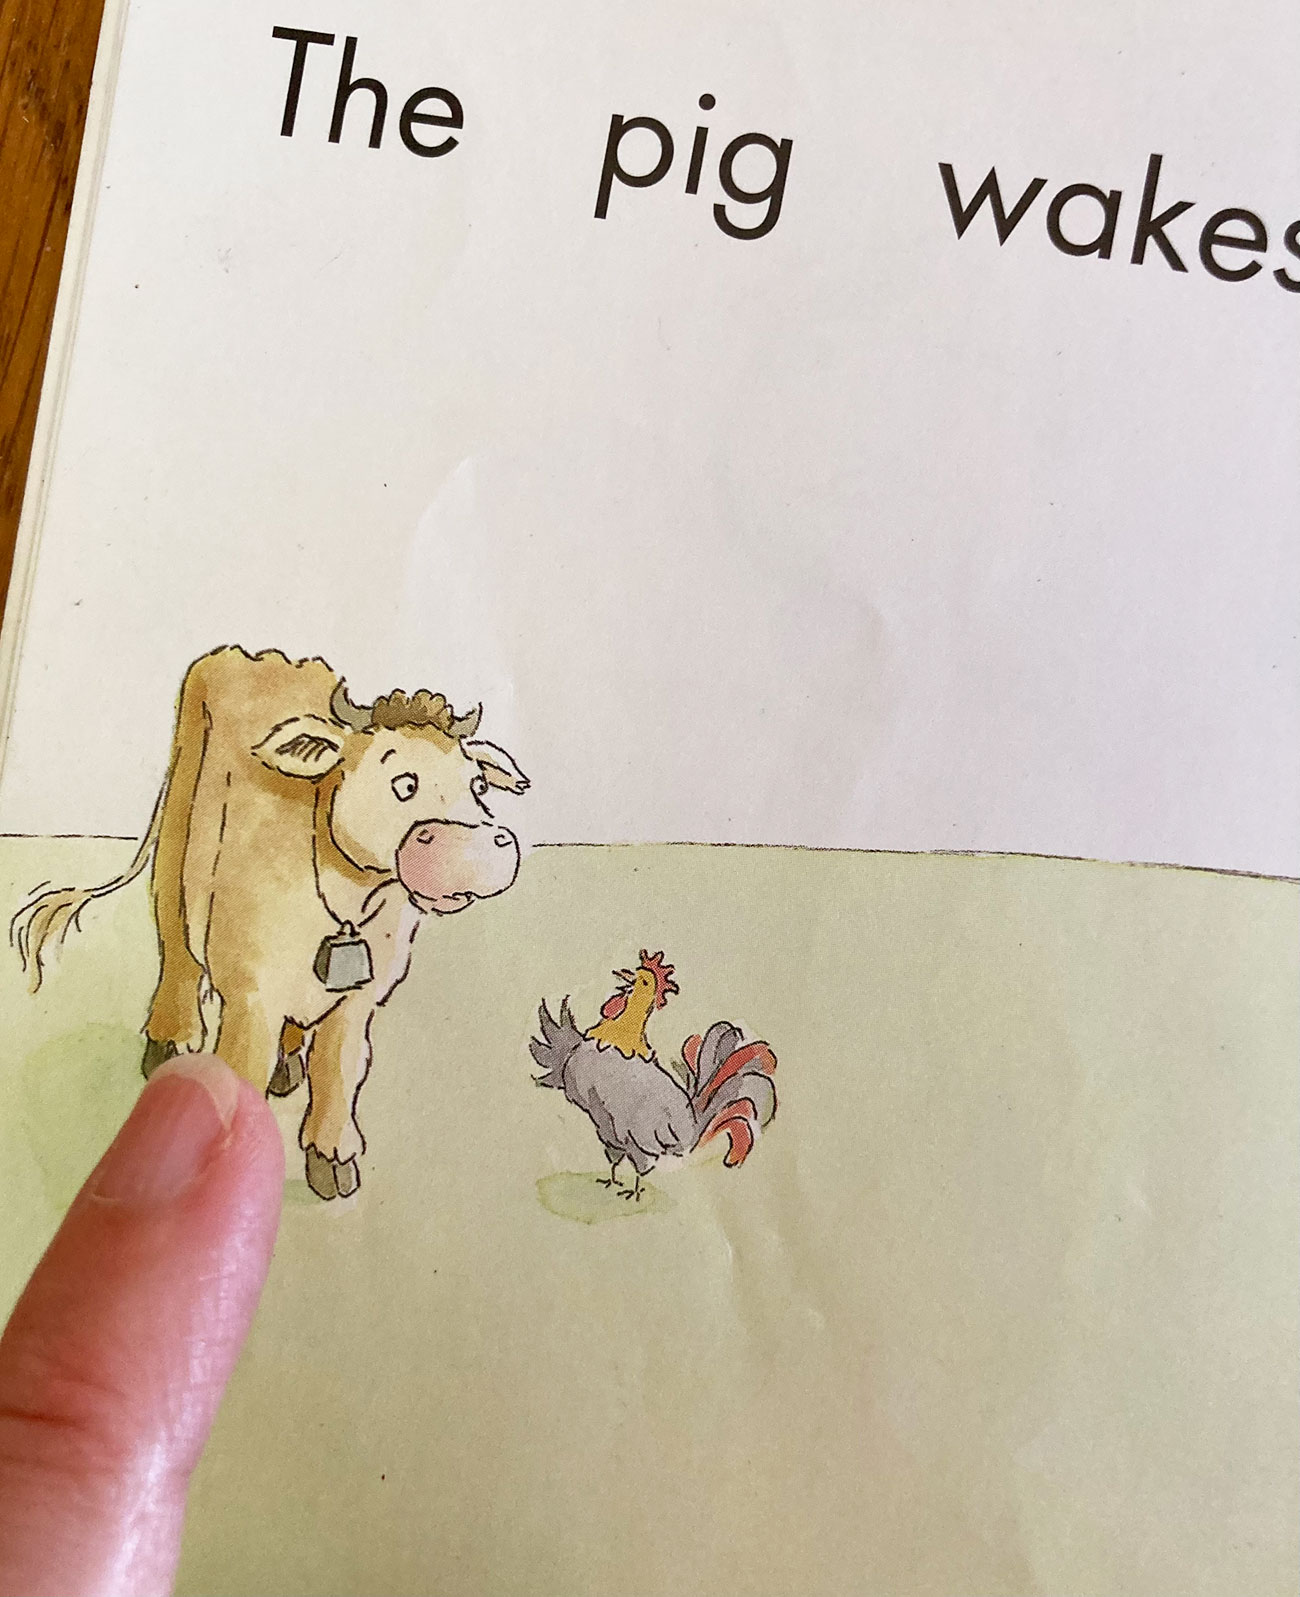 Close-up of a cow in a predictable text book